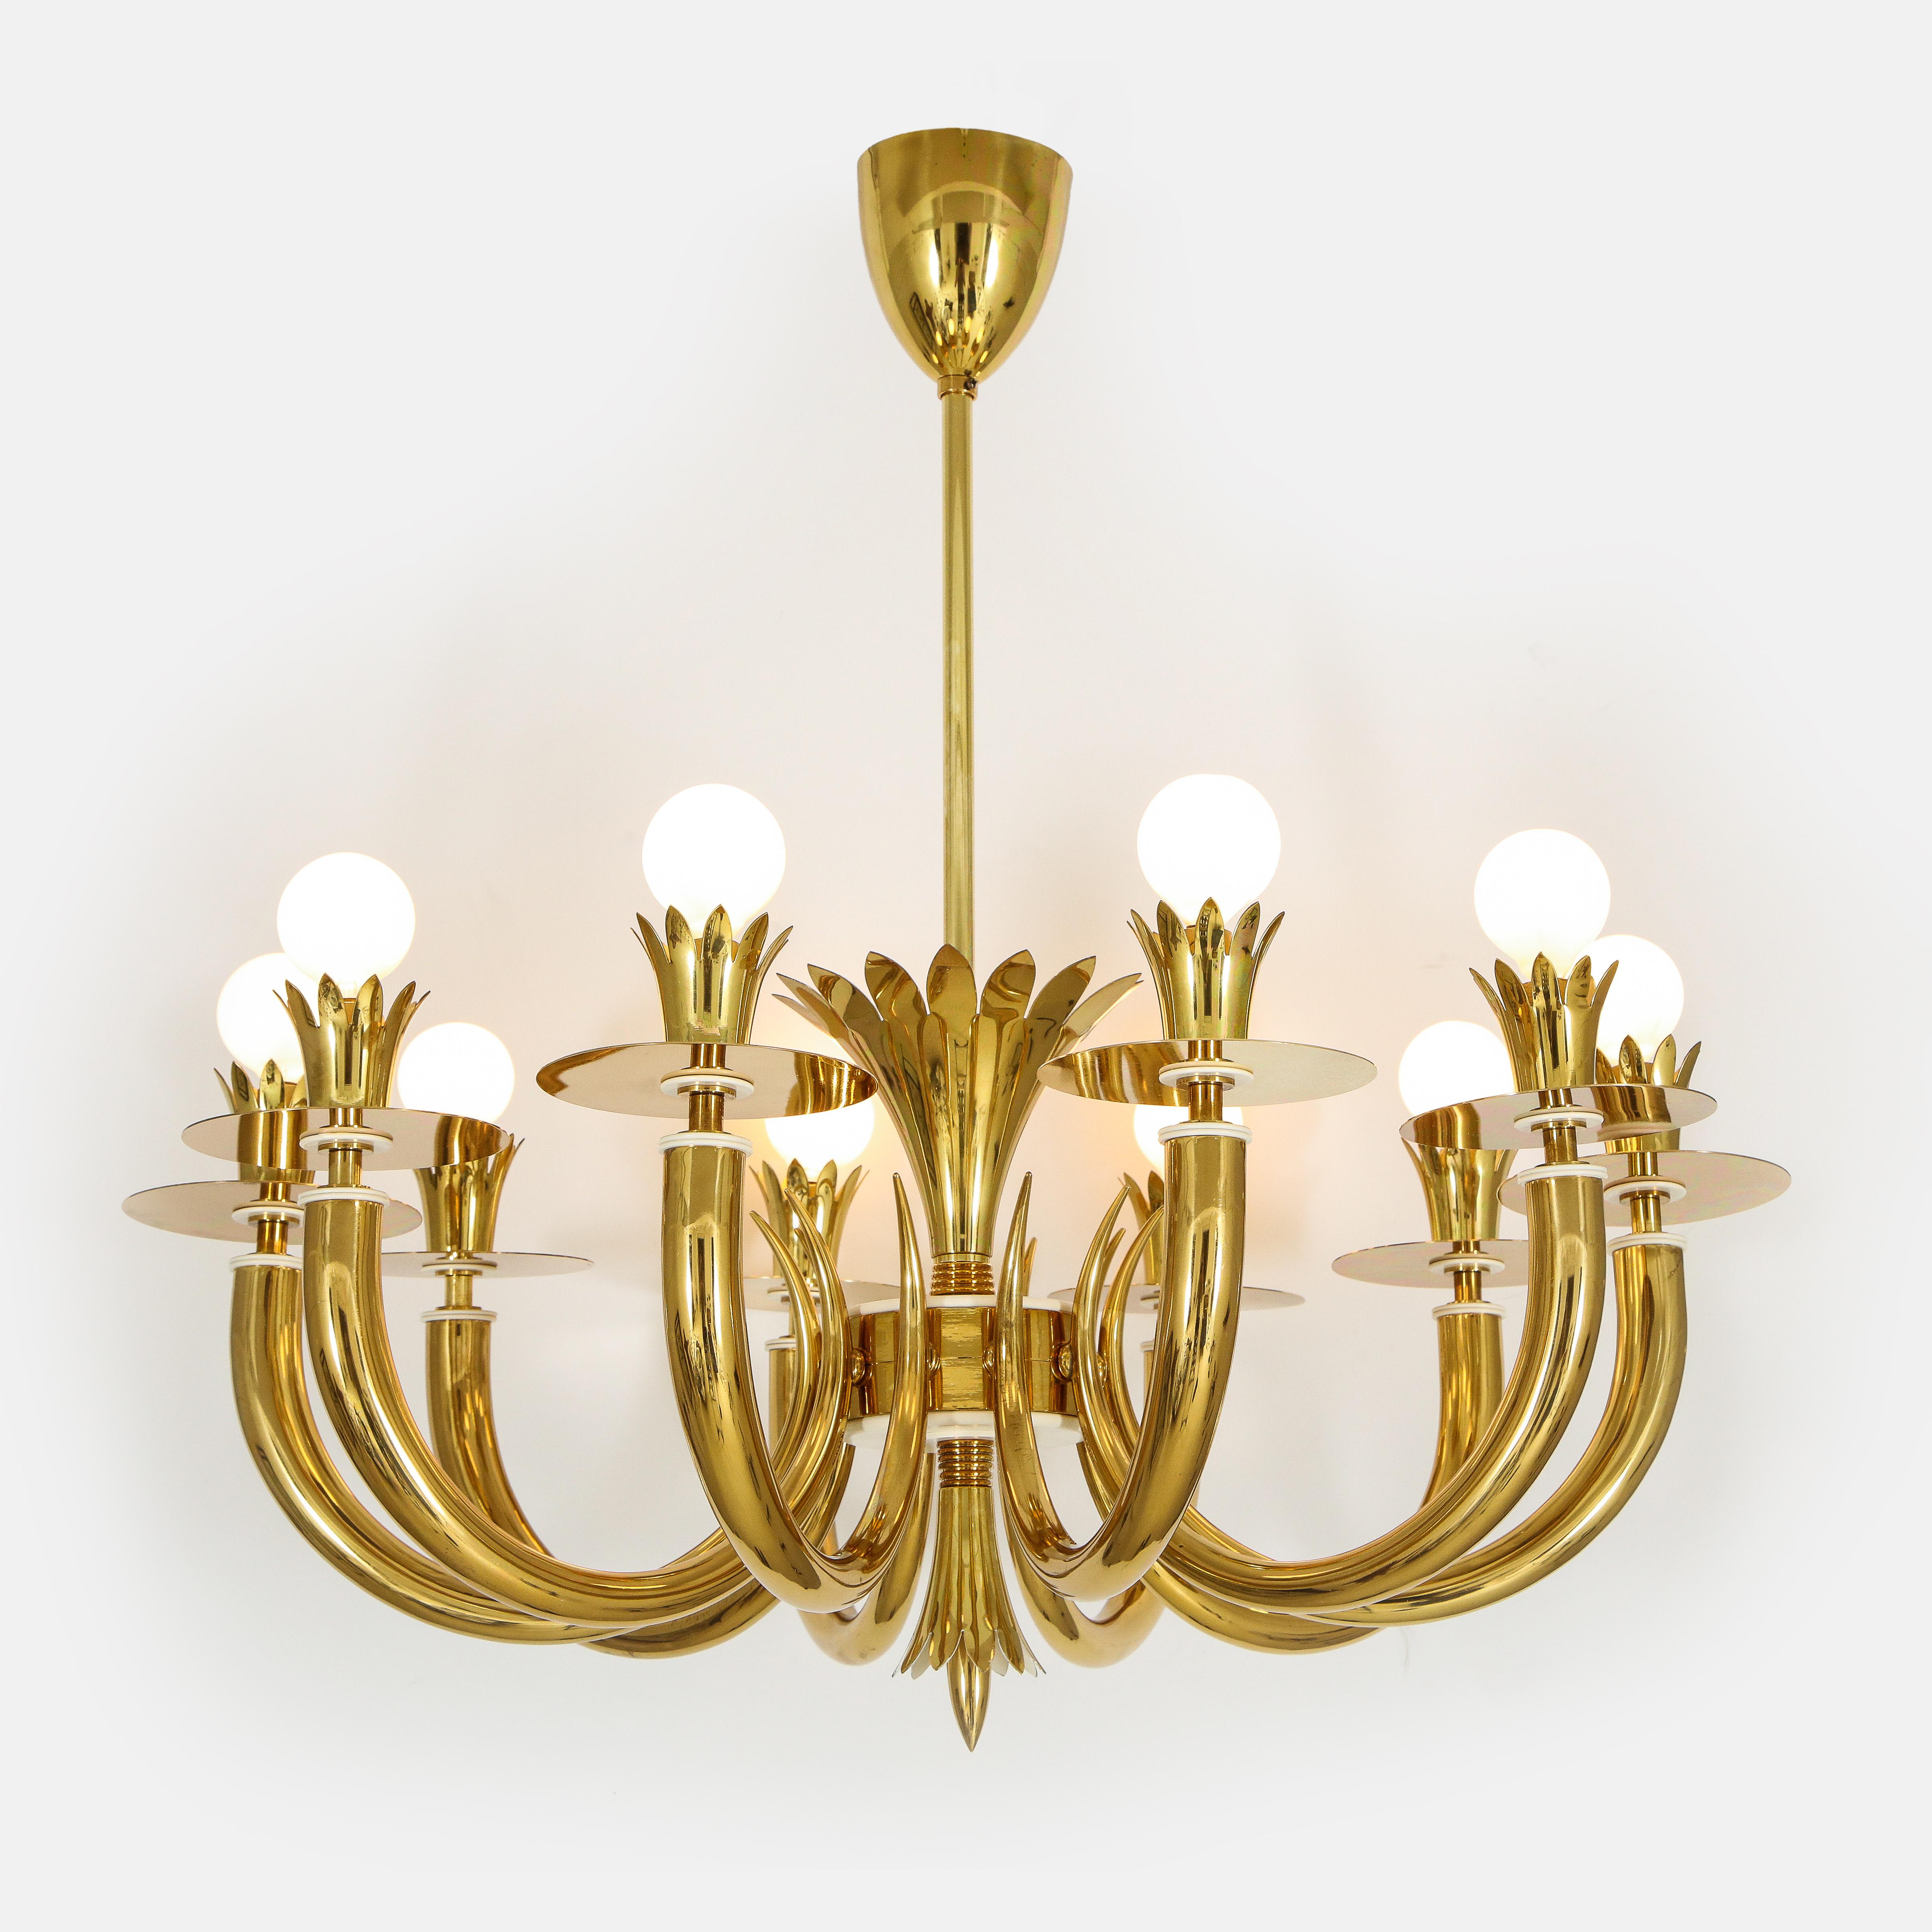 Gio Ponti and Emilio Lancia exquisite rare 10-arm brass chandelier with elegantly draped arms radiating from central foliate motif and ending in foliate cups with subtle white lacquered details throughout. Classic in Art Deco design yet with playful